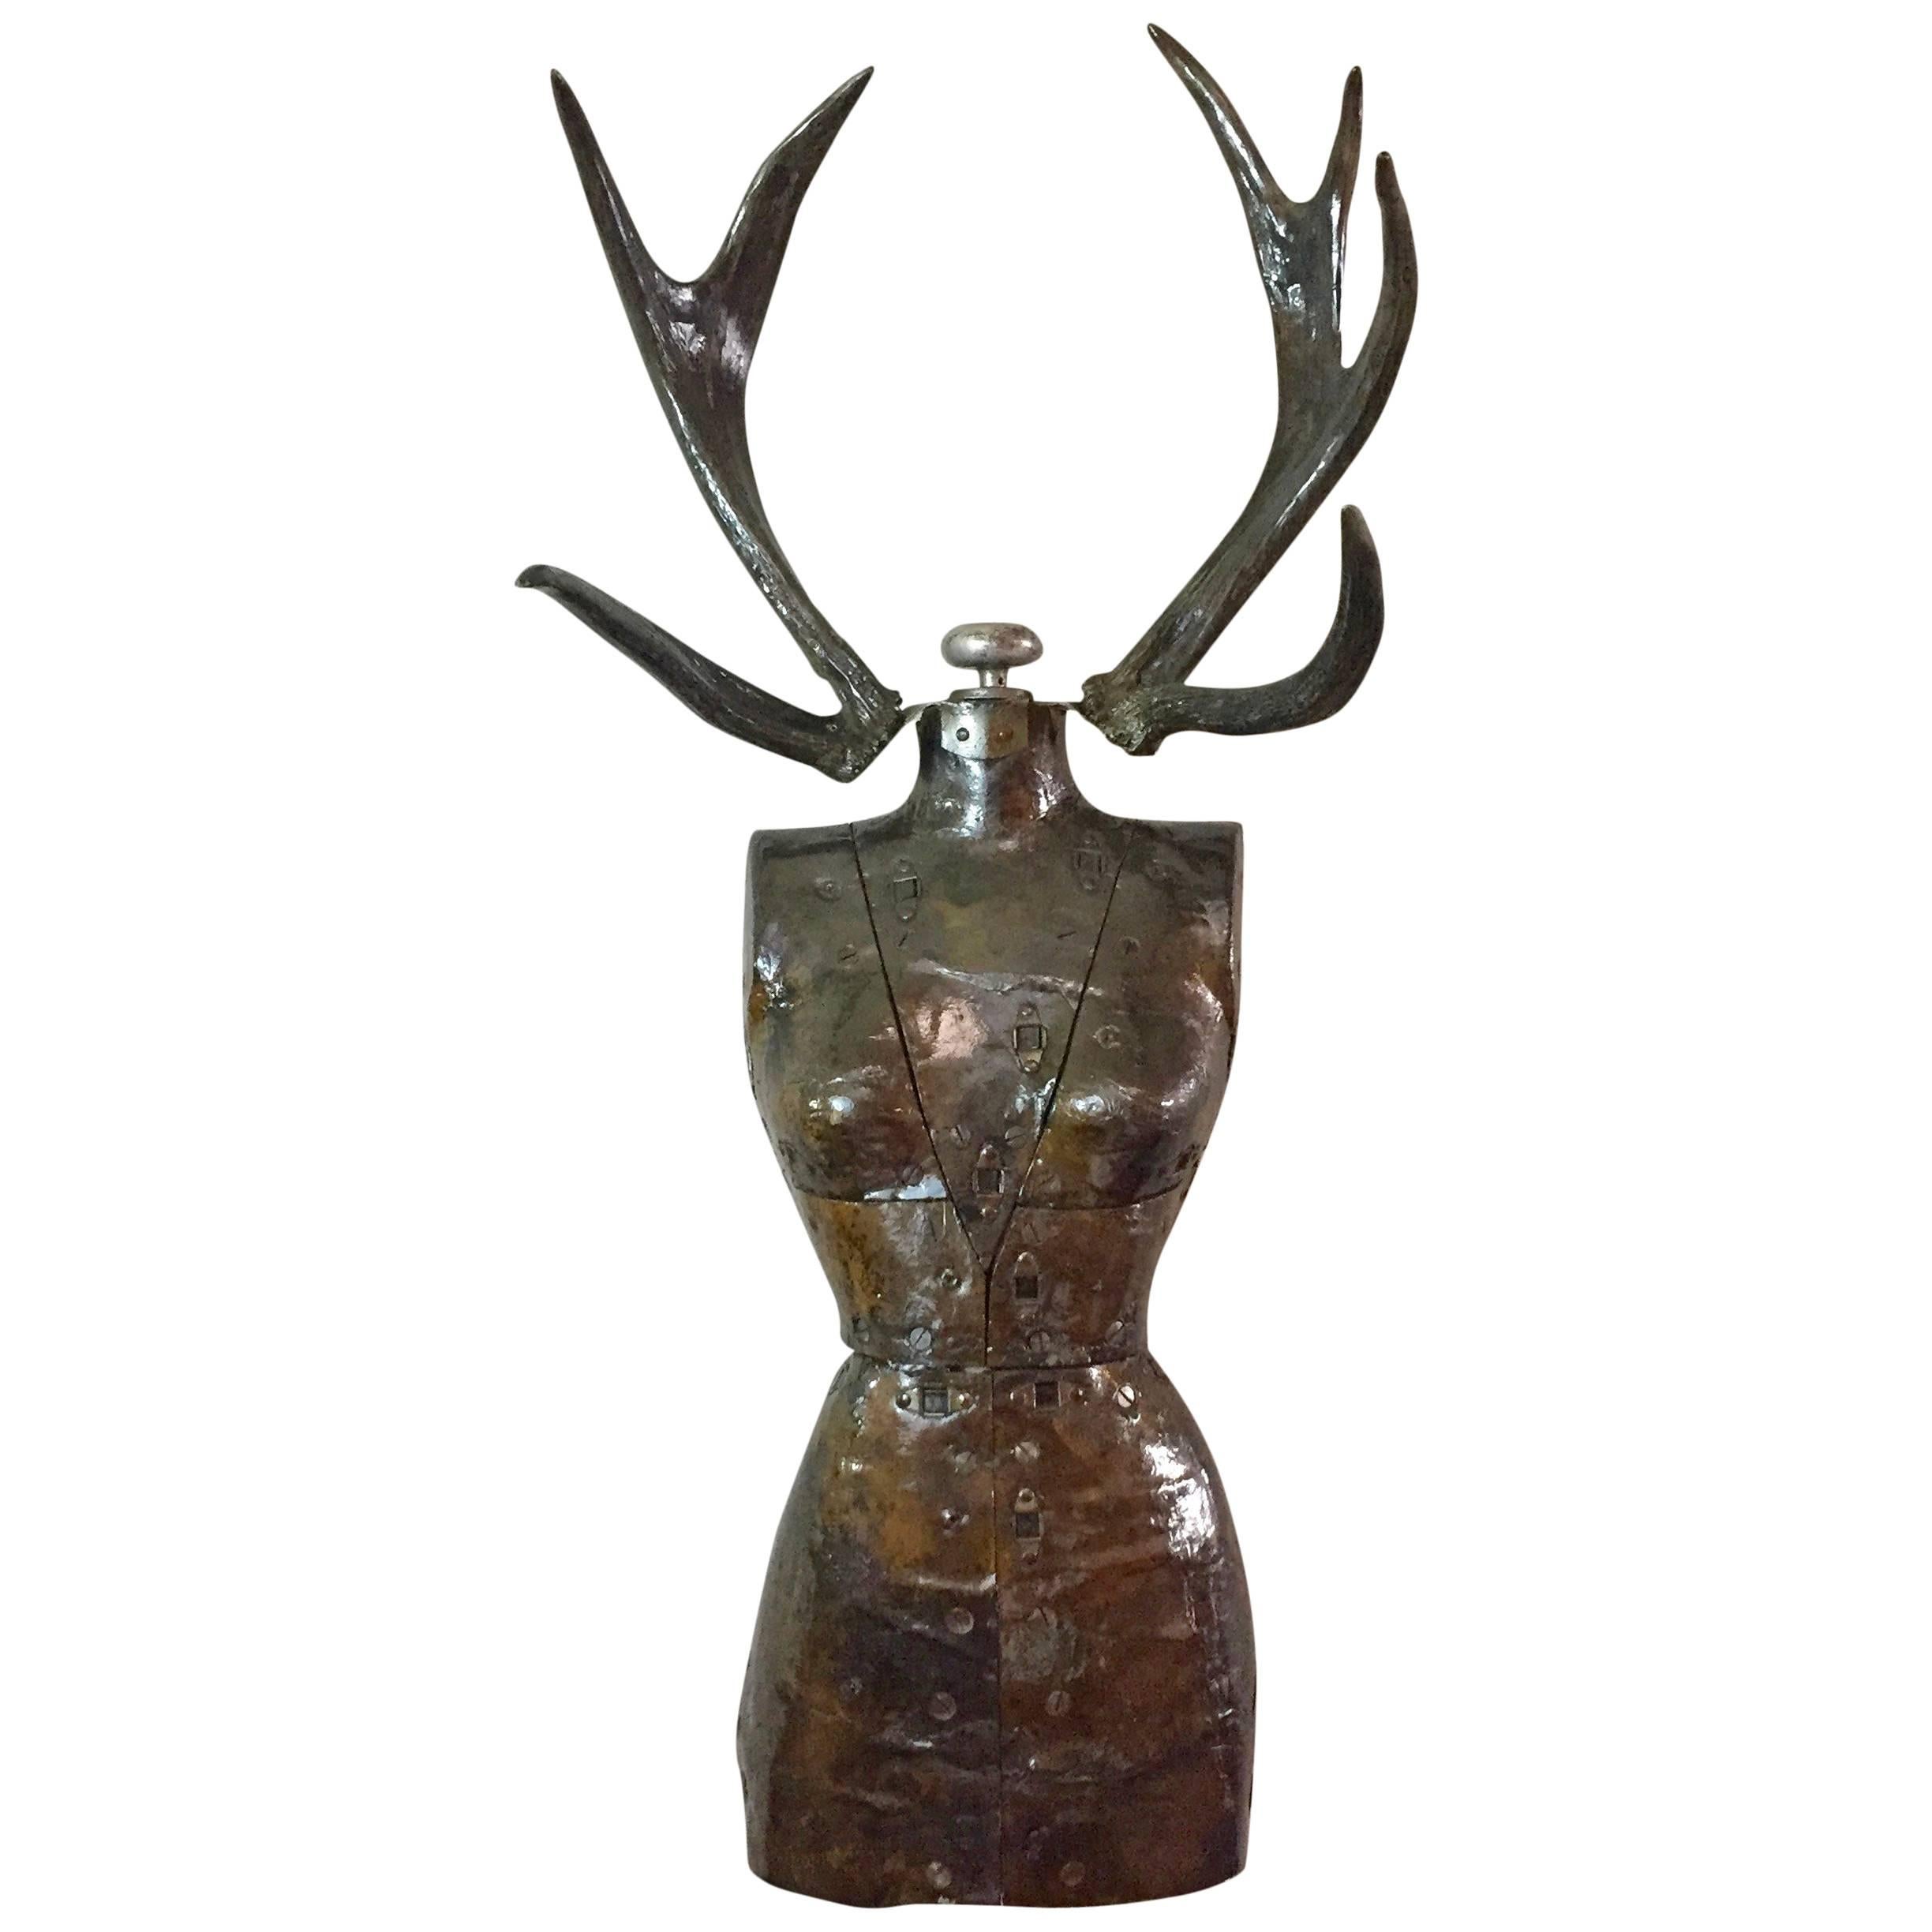 Dave Cole "Trophy Wife #11" Antique Dress Form and Antlers 2017 For Sale